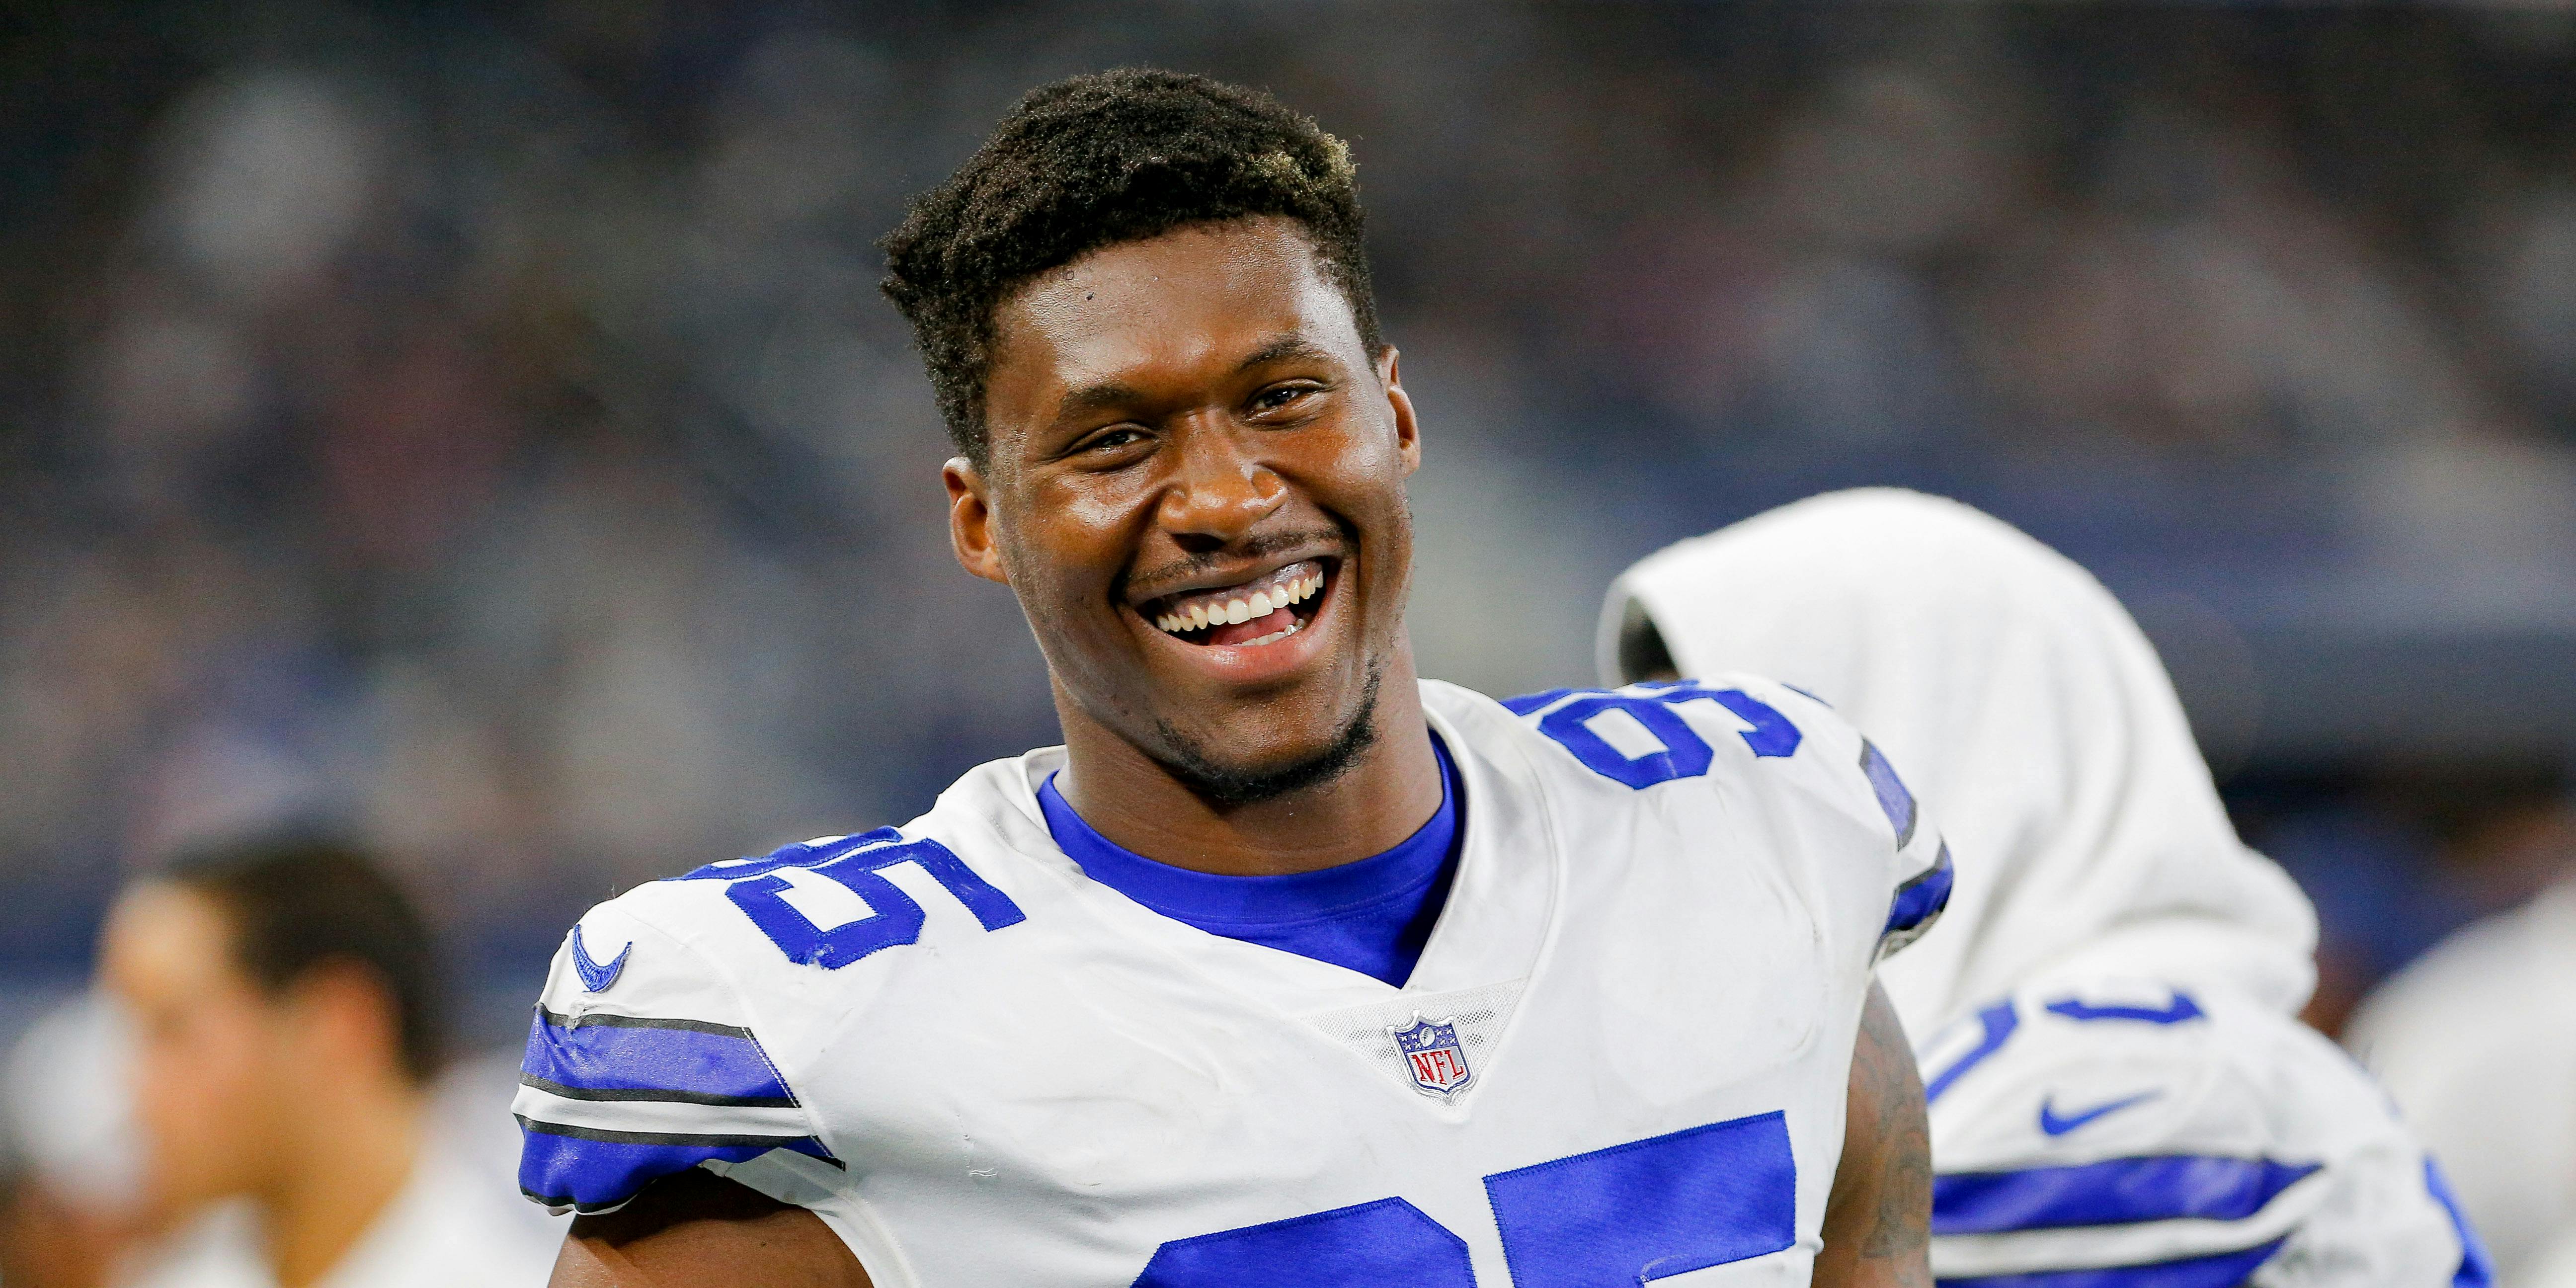 Dallas Cowboys defensive tackle David Irving smiles. He recently posted on his Instagram about his cannabis use, and received a huge amount of backlash.